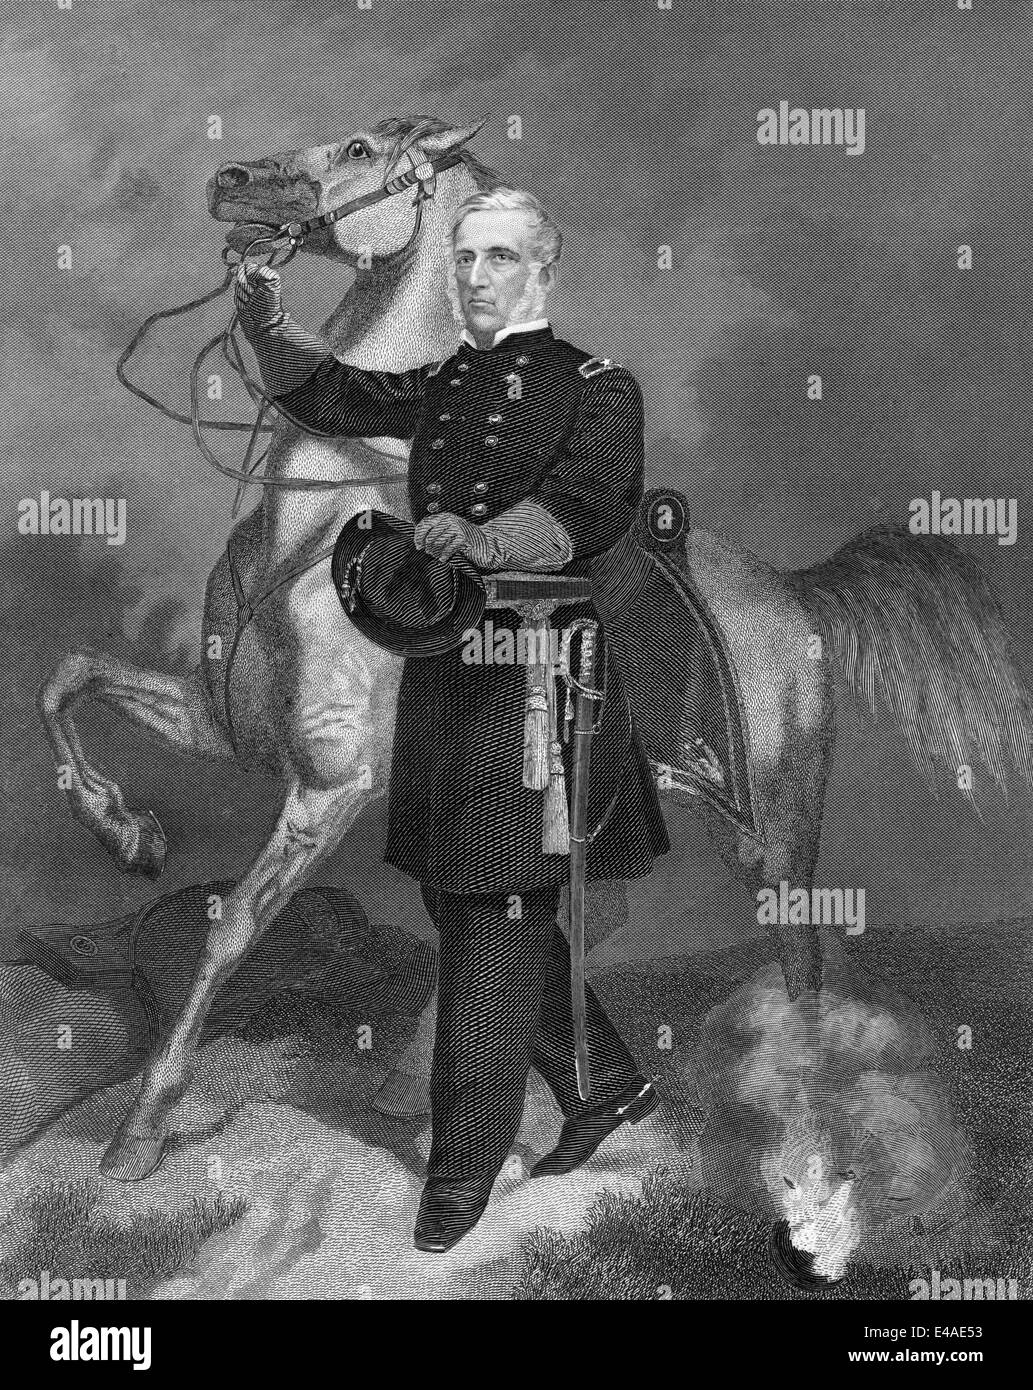 James Samuel Wadsworth, 1807 - 1864, a philanthropist, politician, and a Union general in the American Civil War, Stock Photo